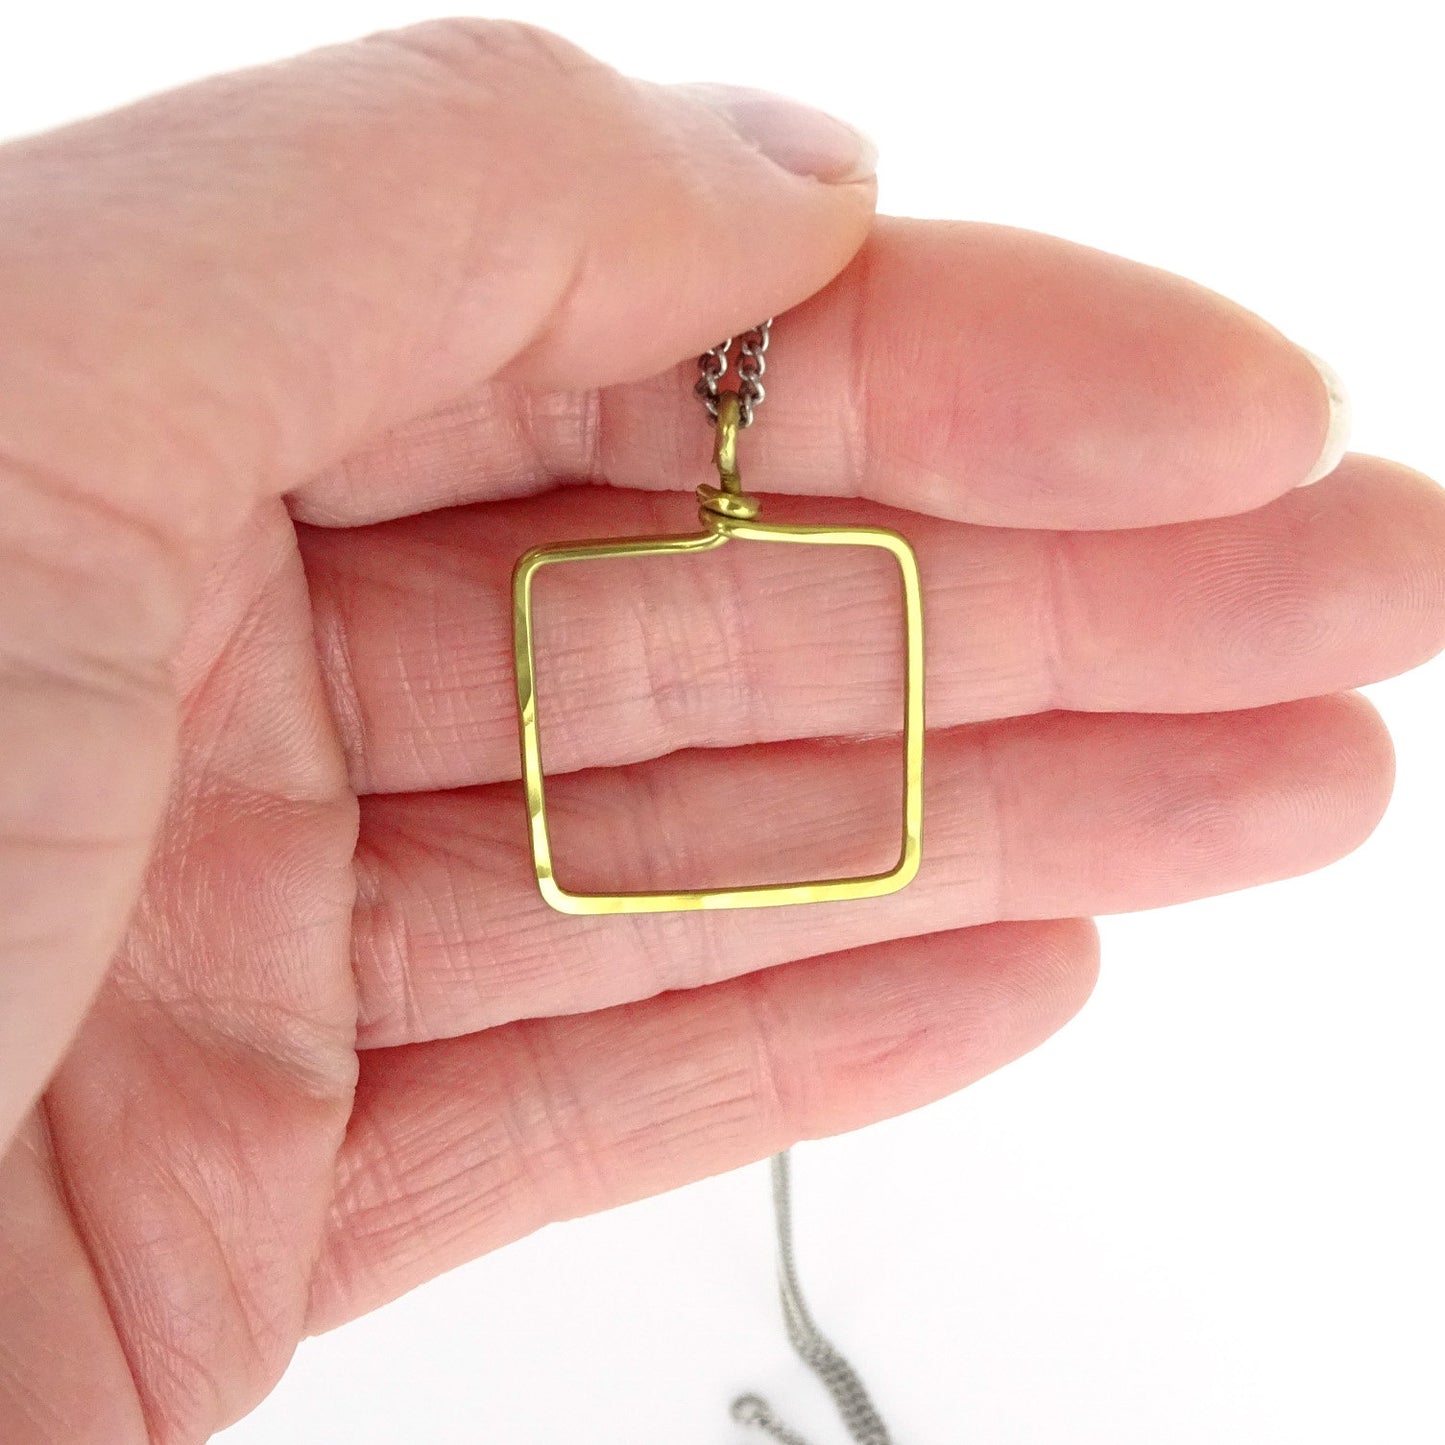 Gold Square Titanium Necklace, Rectangle Pendant, Hypoallergenic Geometric Necklace, Nickel Free Jewelry Mixed Metals